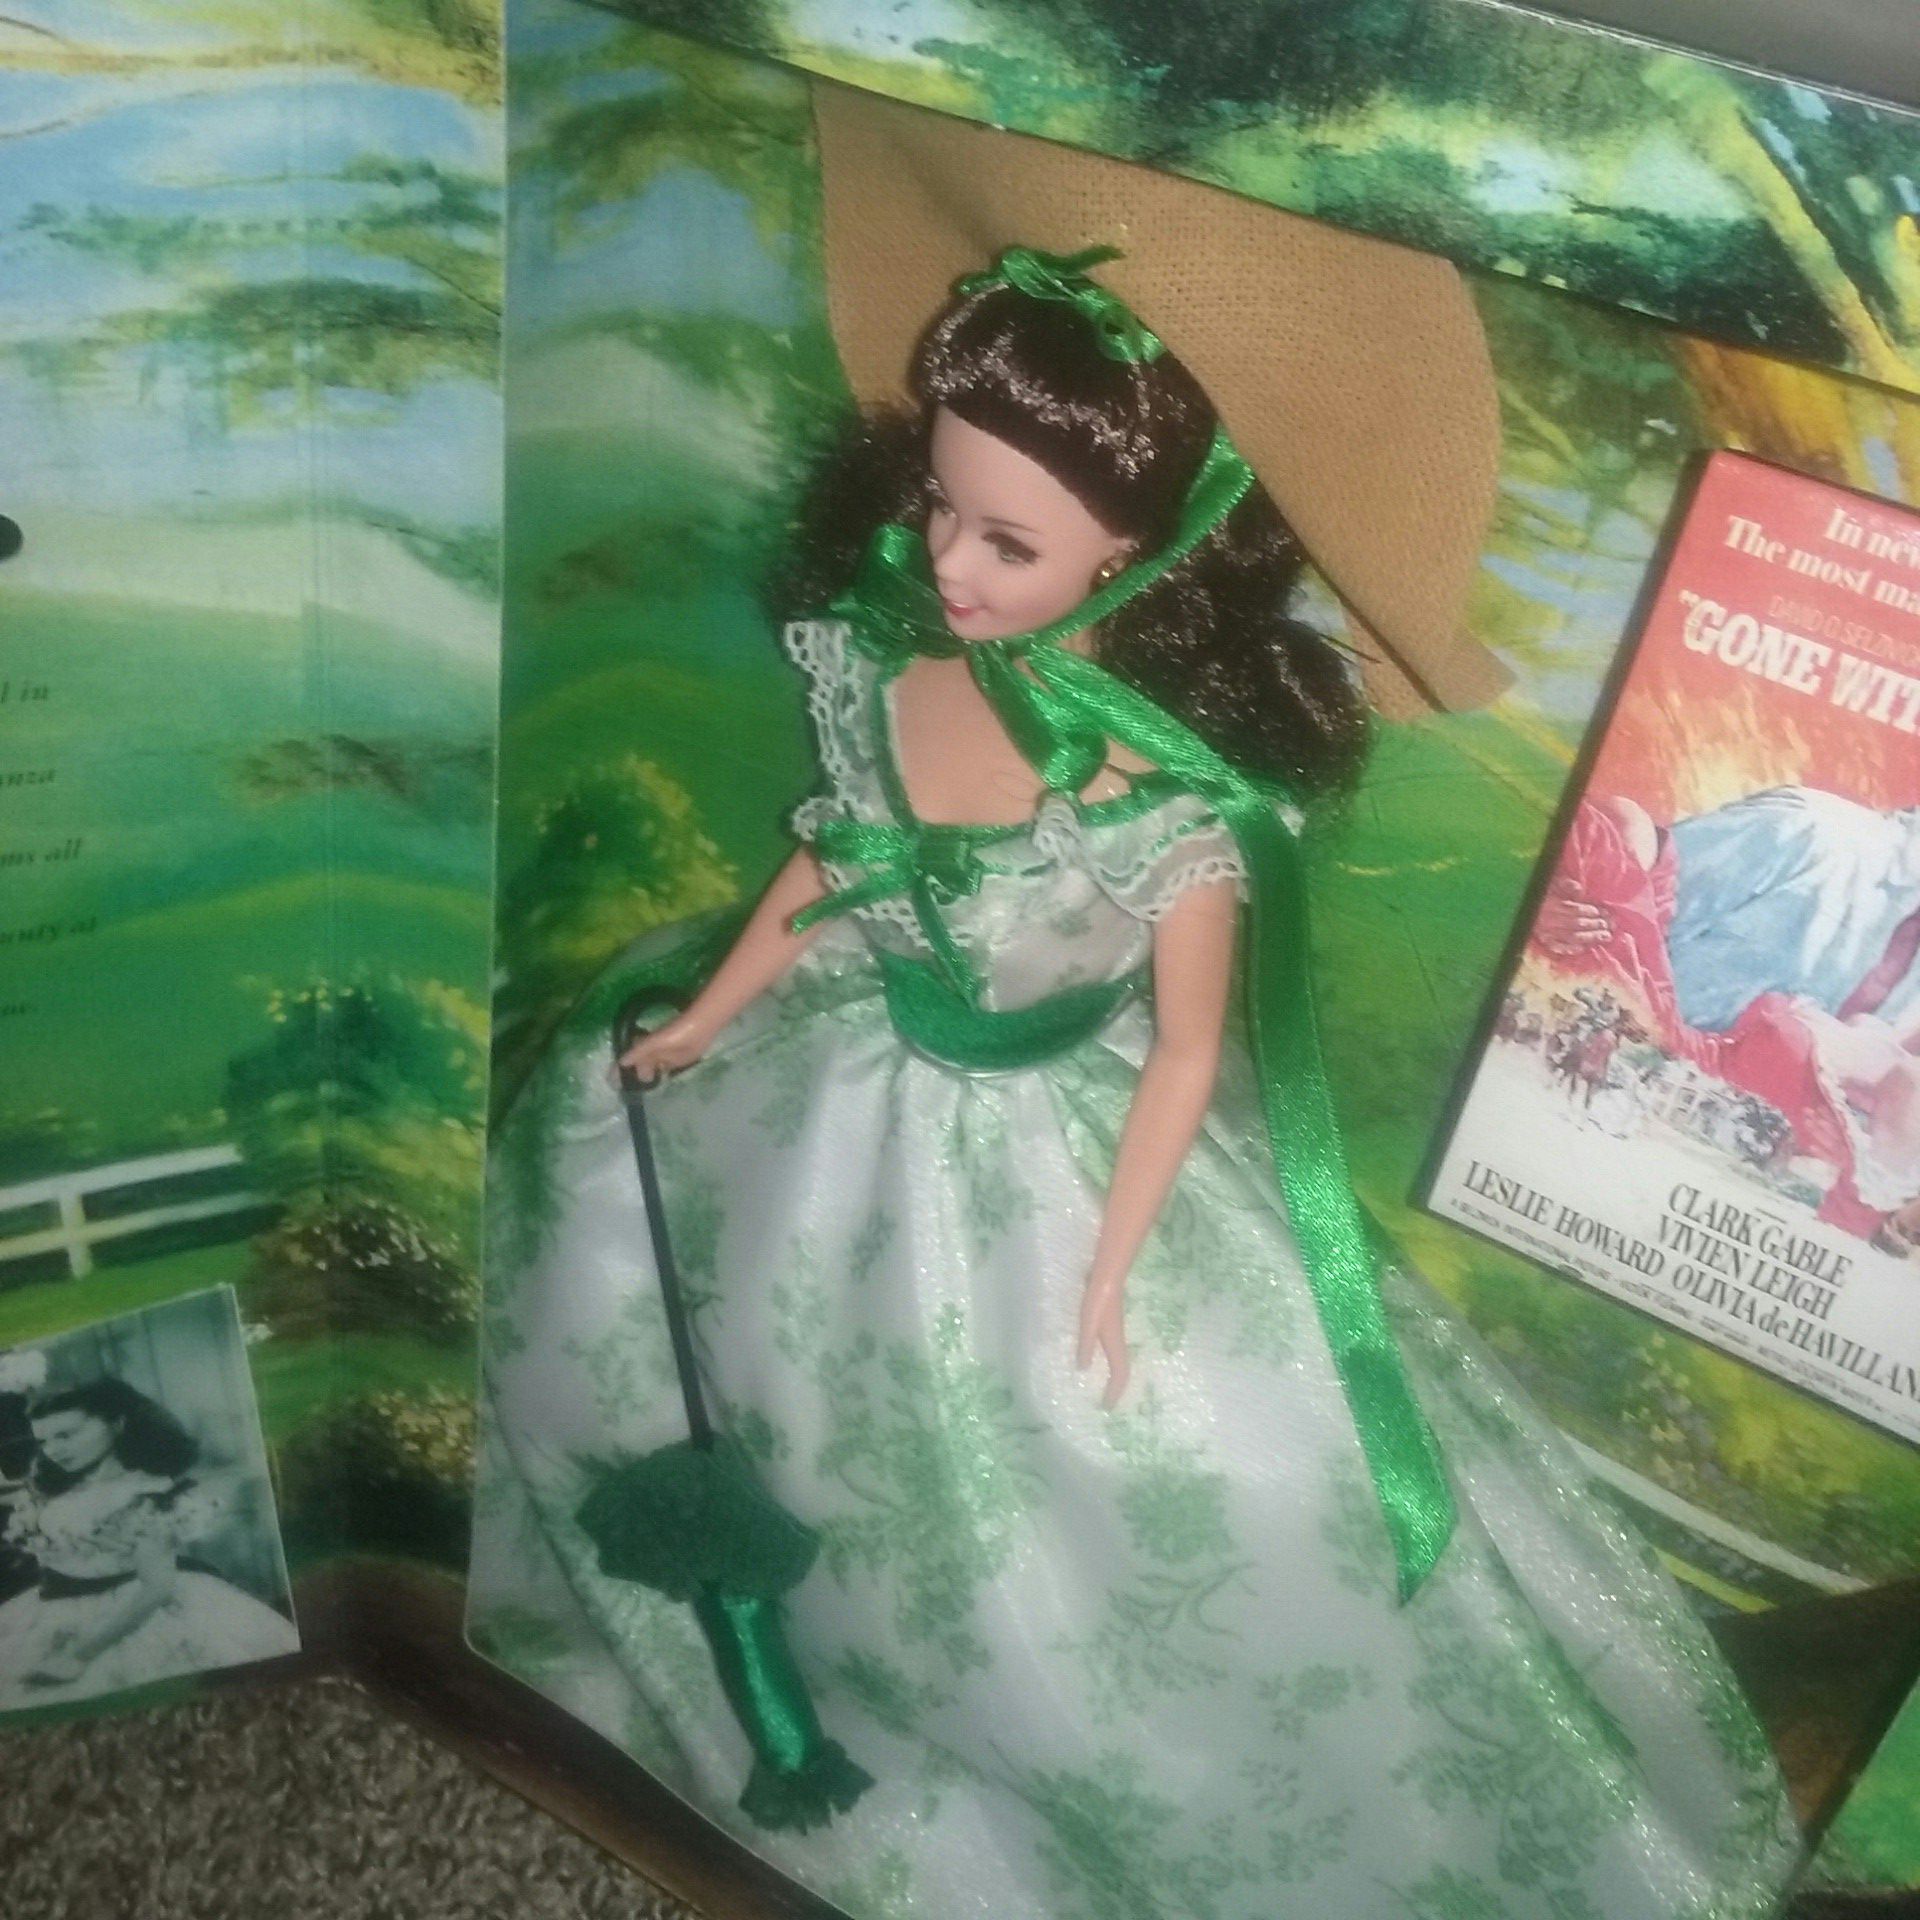 Lower price,Vintage Barbie Never Opened Scarlett O' Hara -" Gone with the Wind " BARBIE